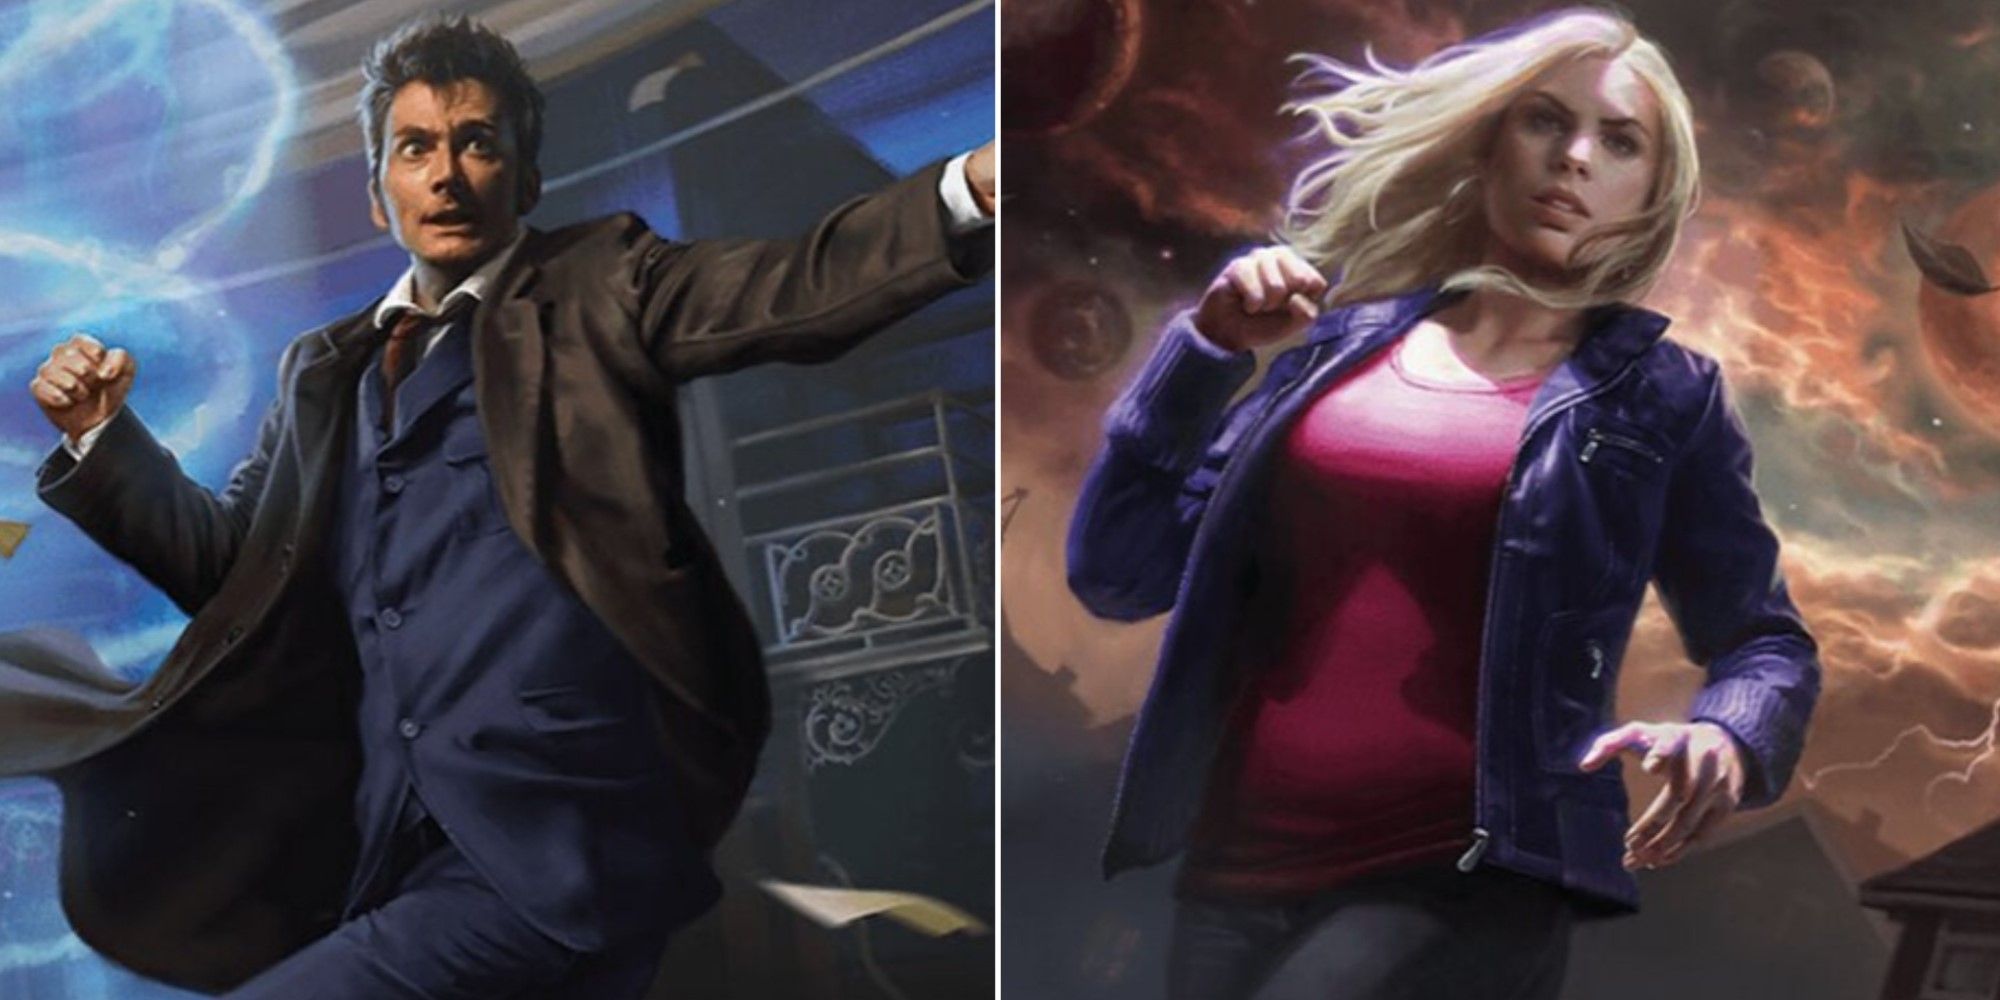 Artwork from two different cards from Magic: The Gathering's Universes Beyond: Doctor Who series